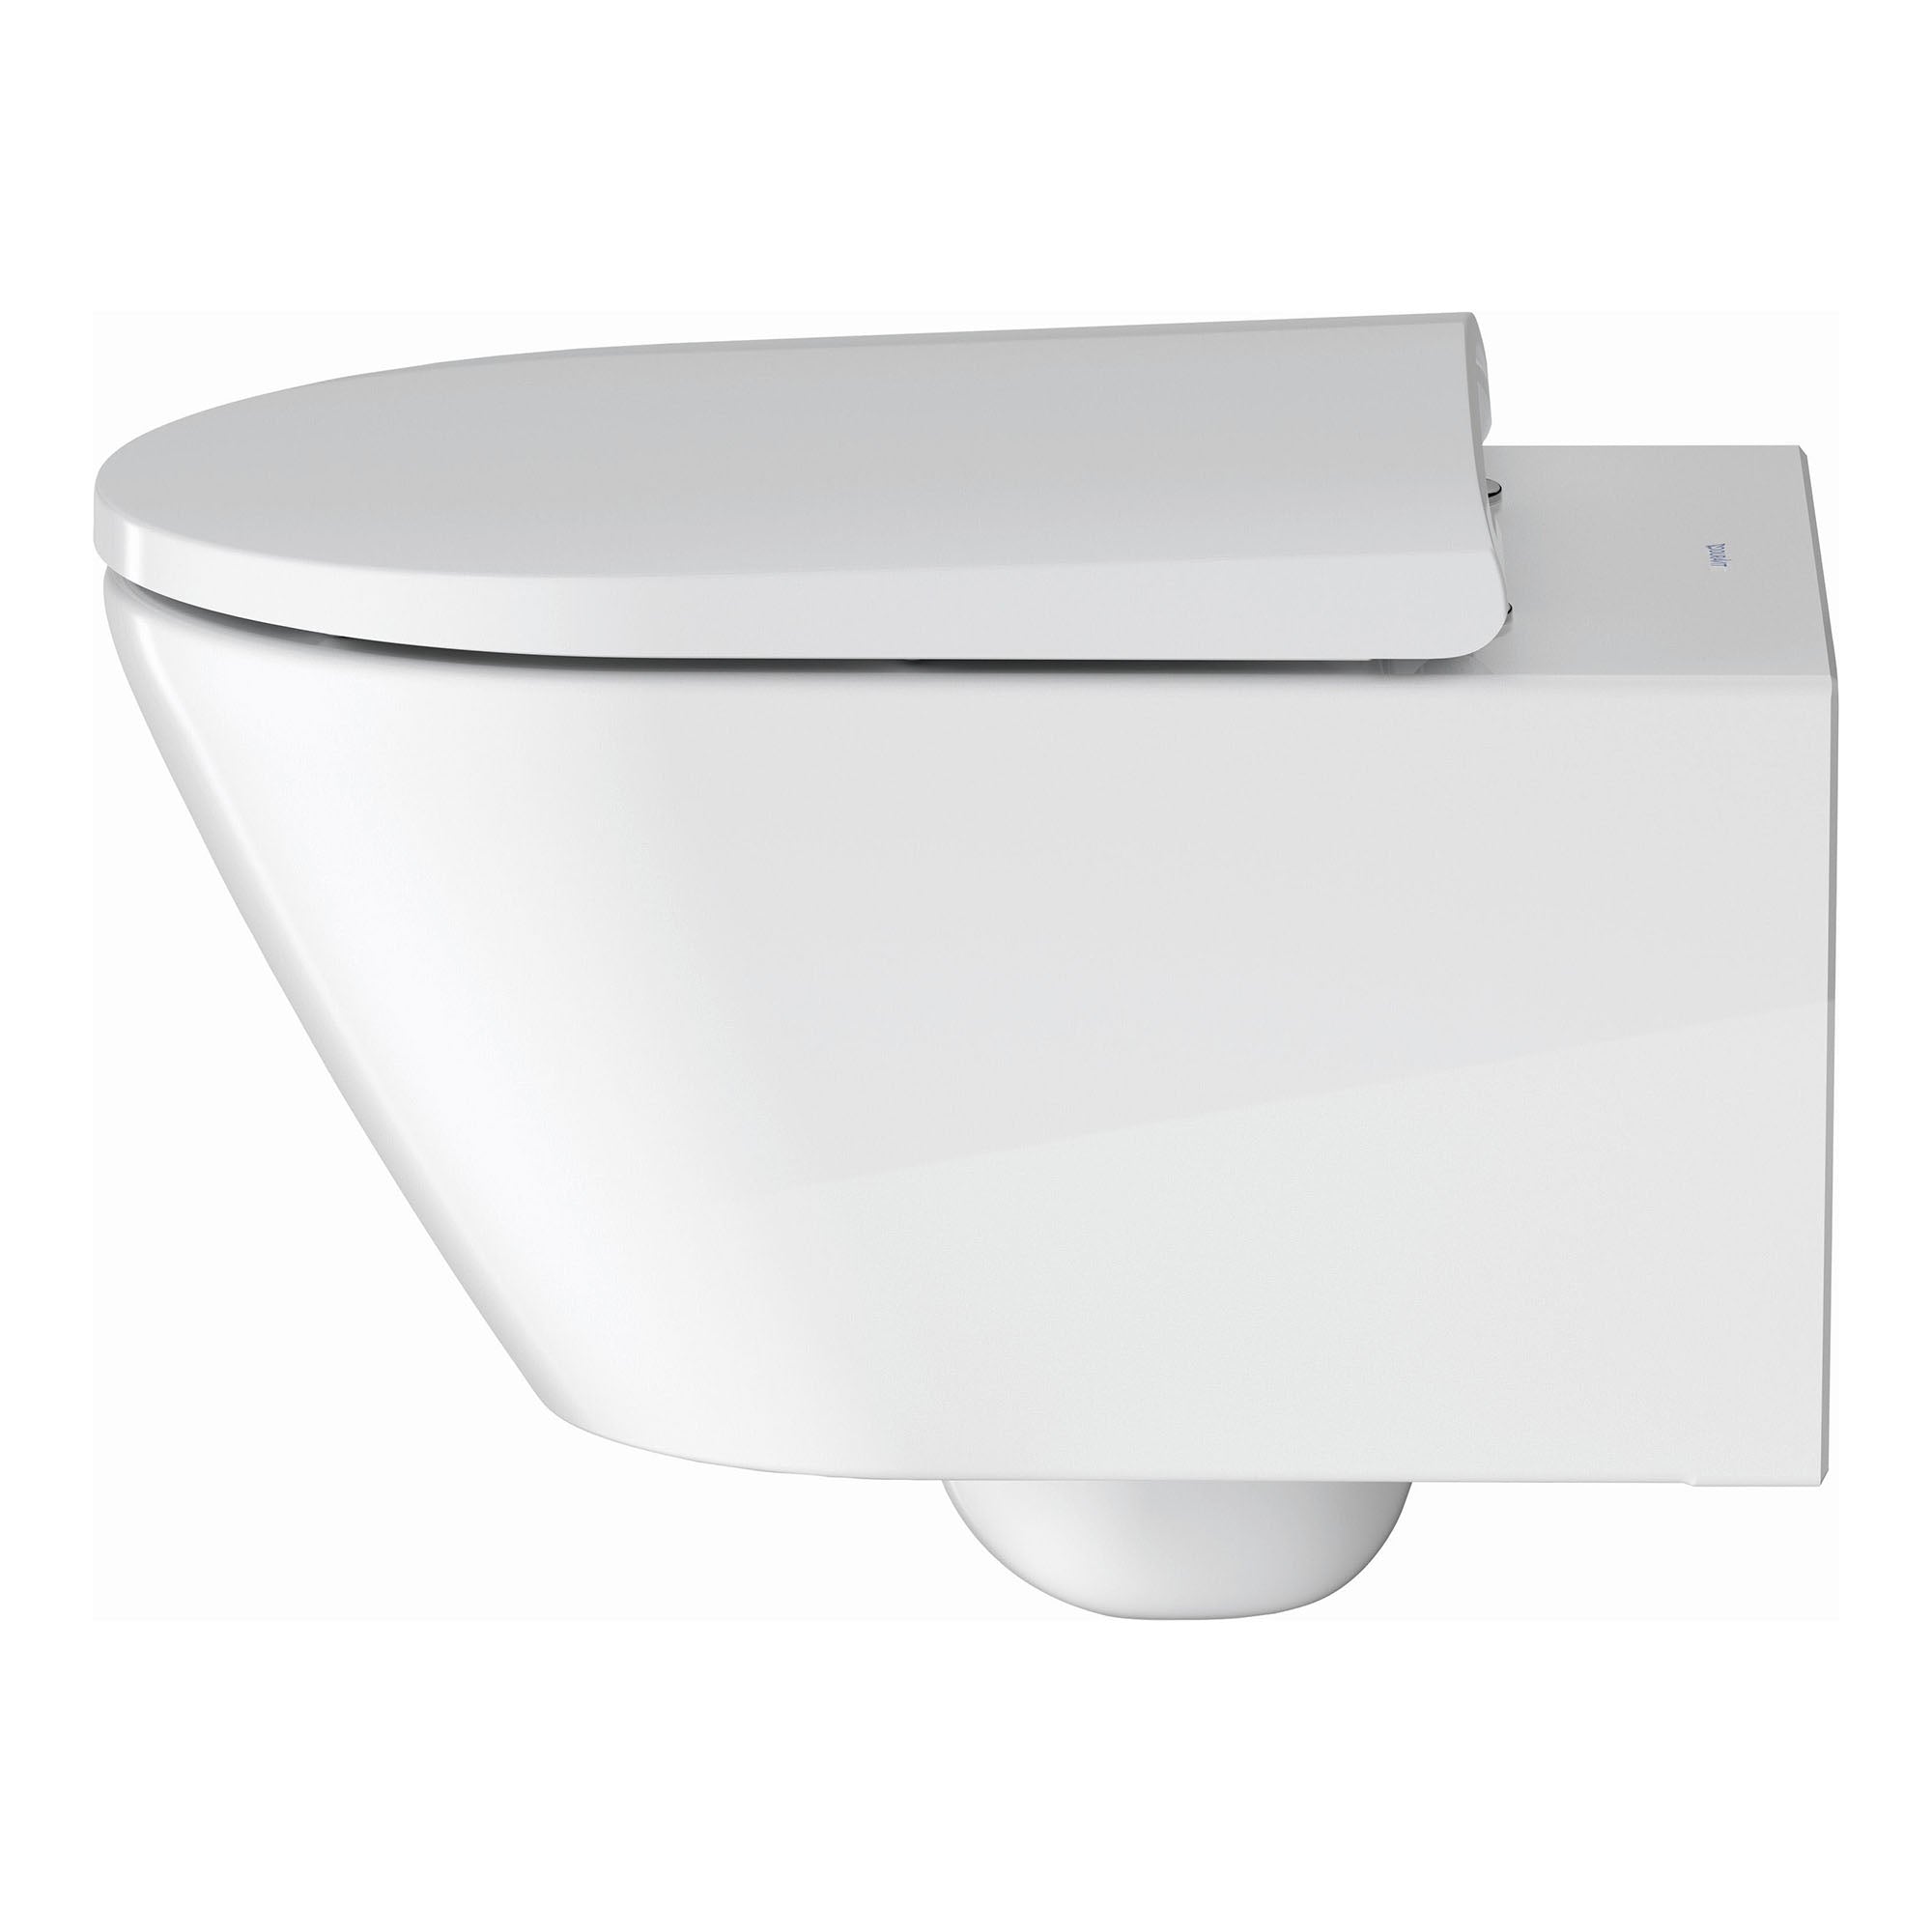 duravit d neo rimless wall hung wc with soft close seat white gloss